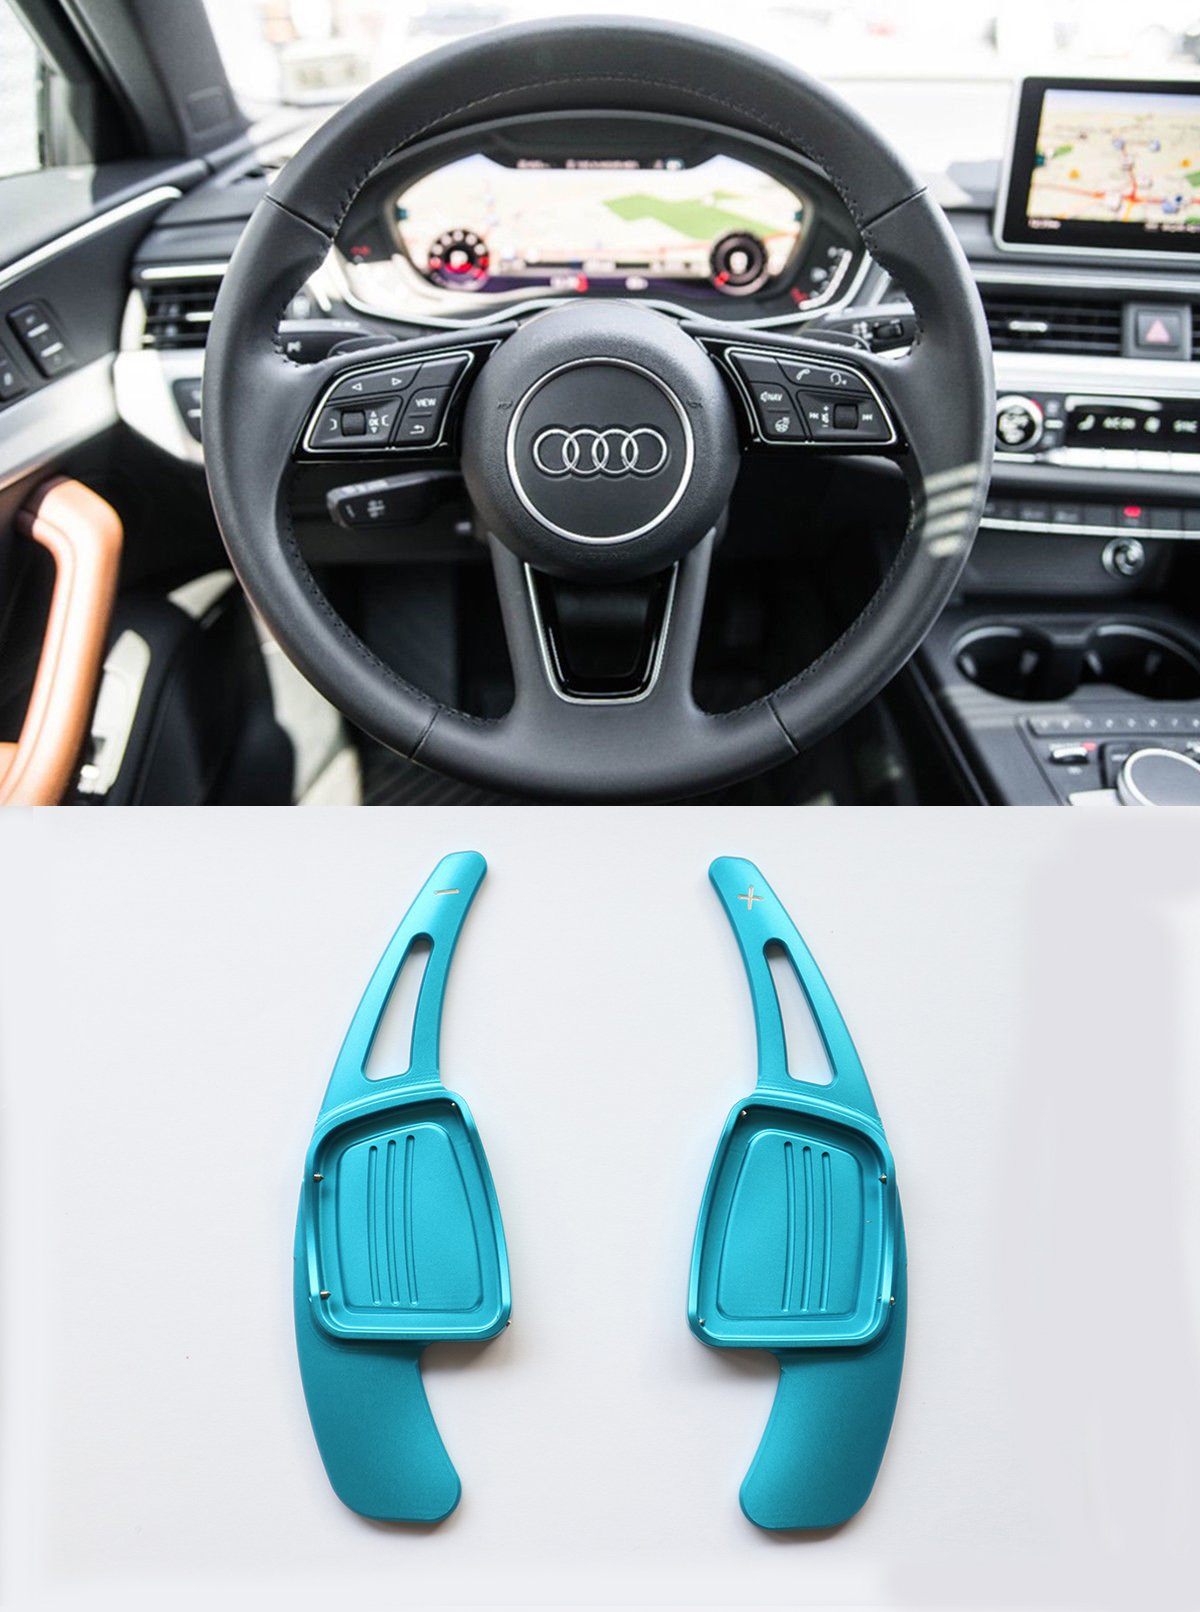 Pinalloy CNC Metal Blue Alloy Steering Paddle Shifter Extension for Audi A3 A4L A5 Q7 TT TTS S4 Q2 S3 SQ 2016-2017 - Pinalloy Online Auto Accessories Lightweight Car Kit 